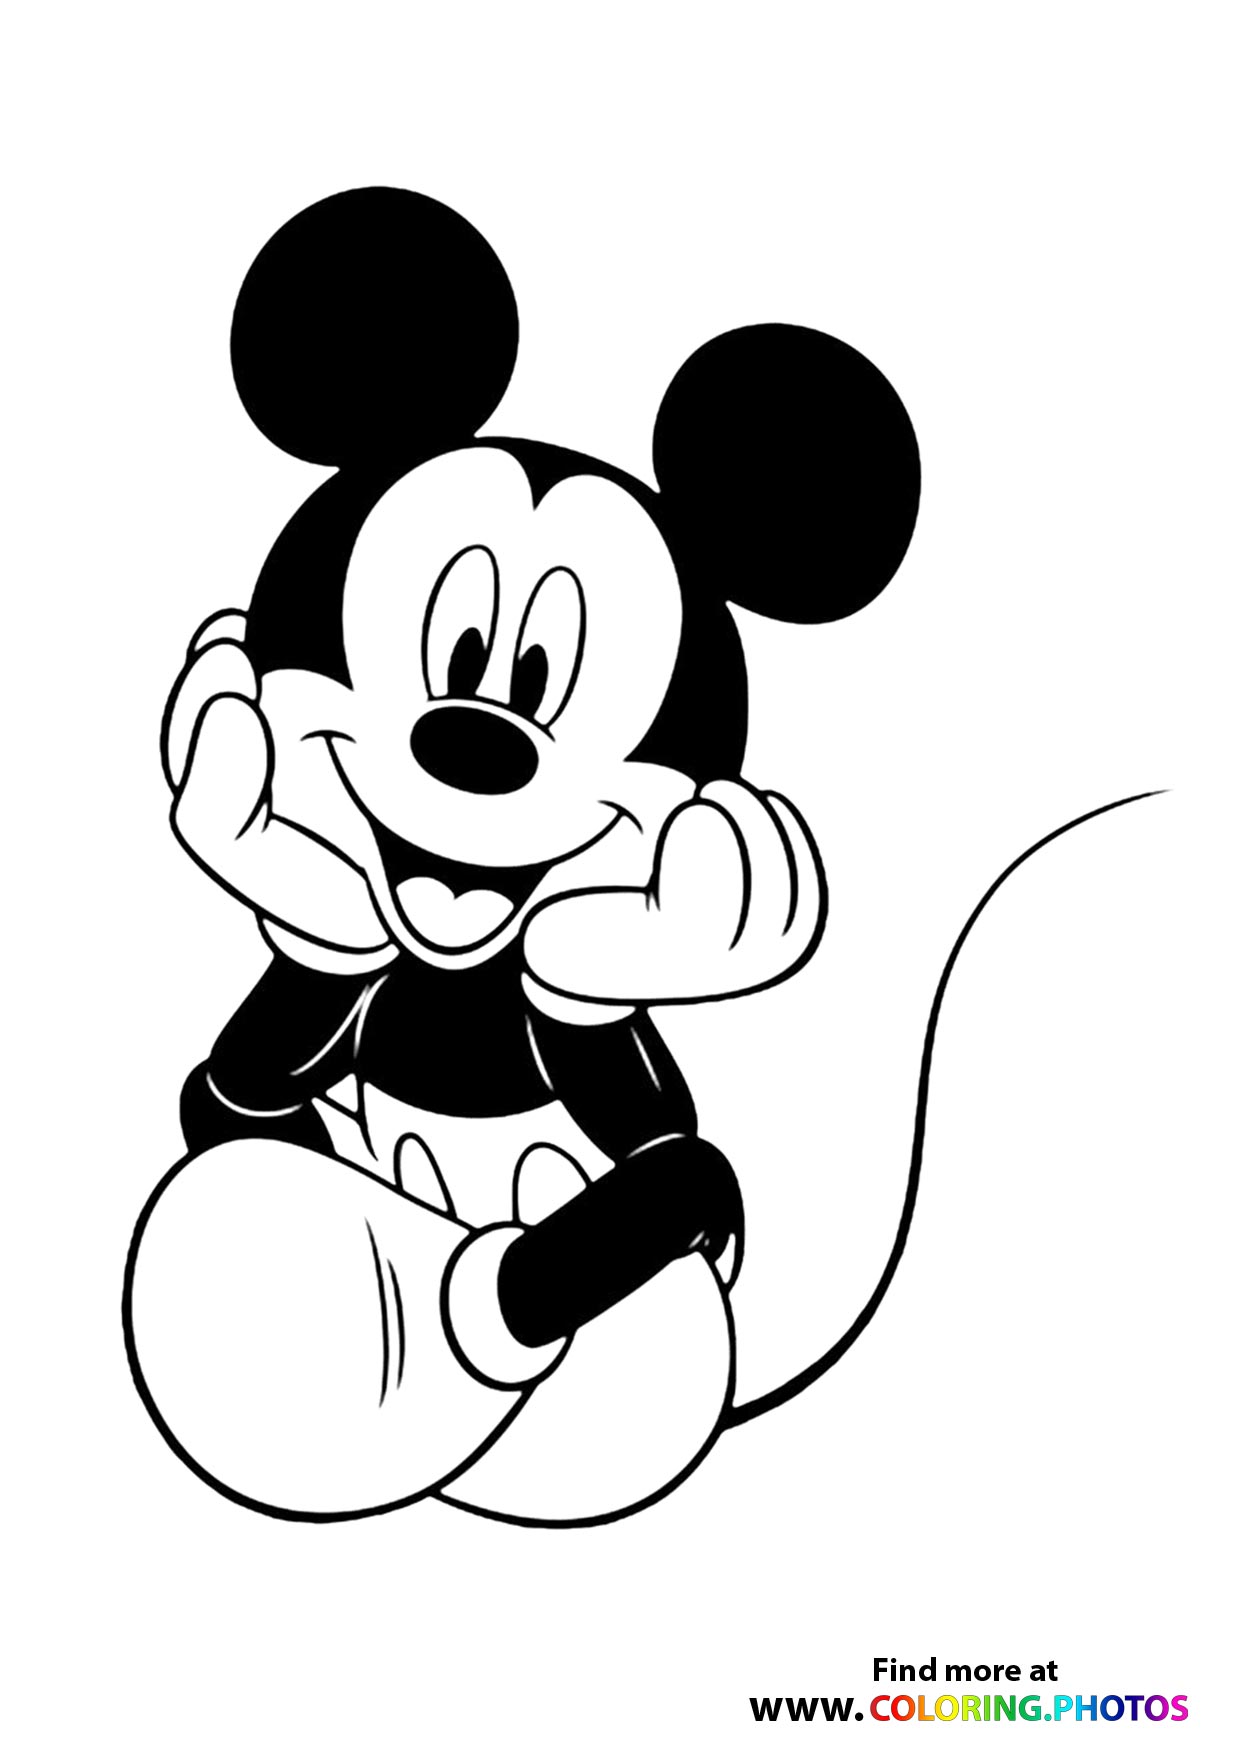 Mickey Mouse - Coloring Pages for kids | Free and easy print or download